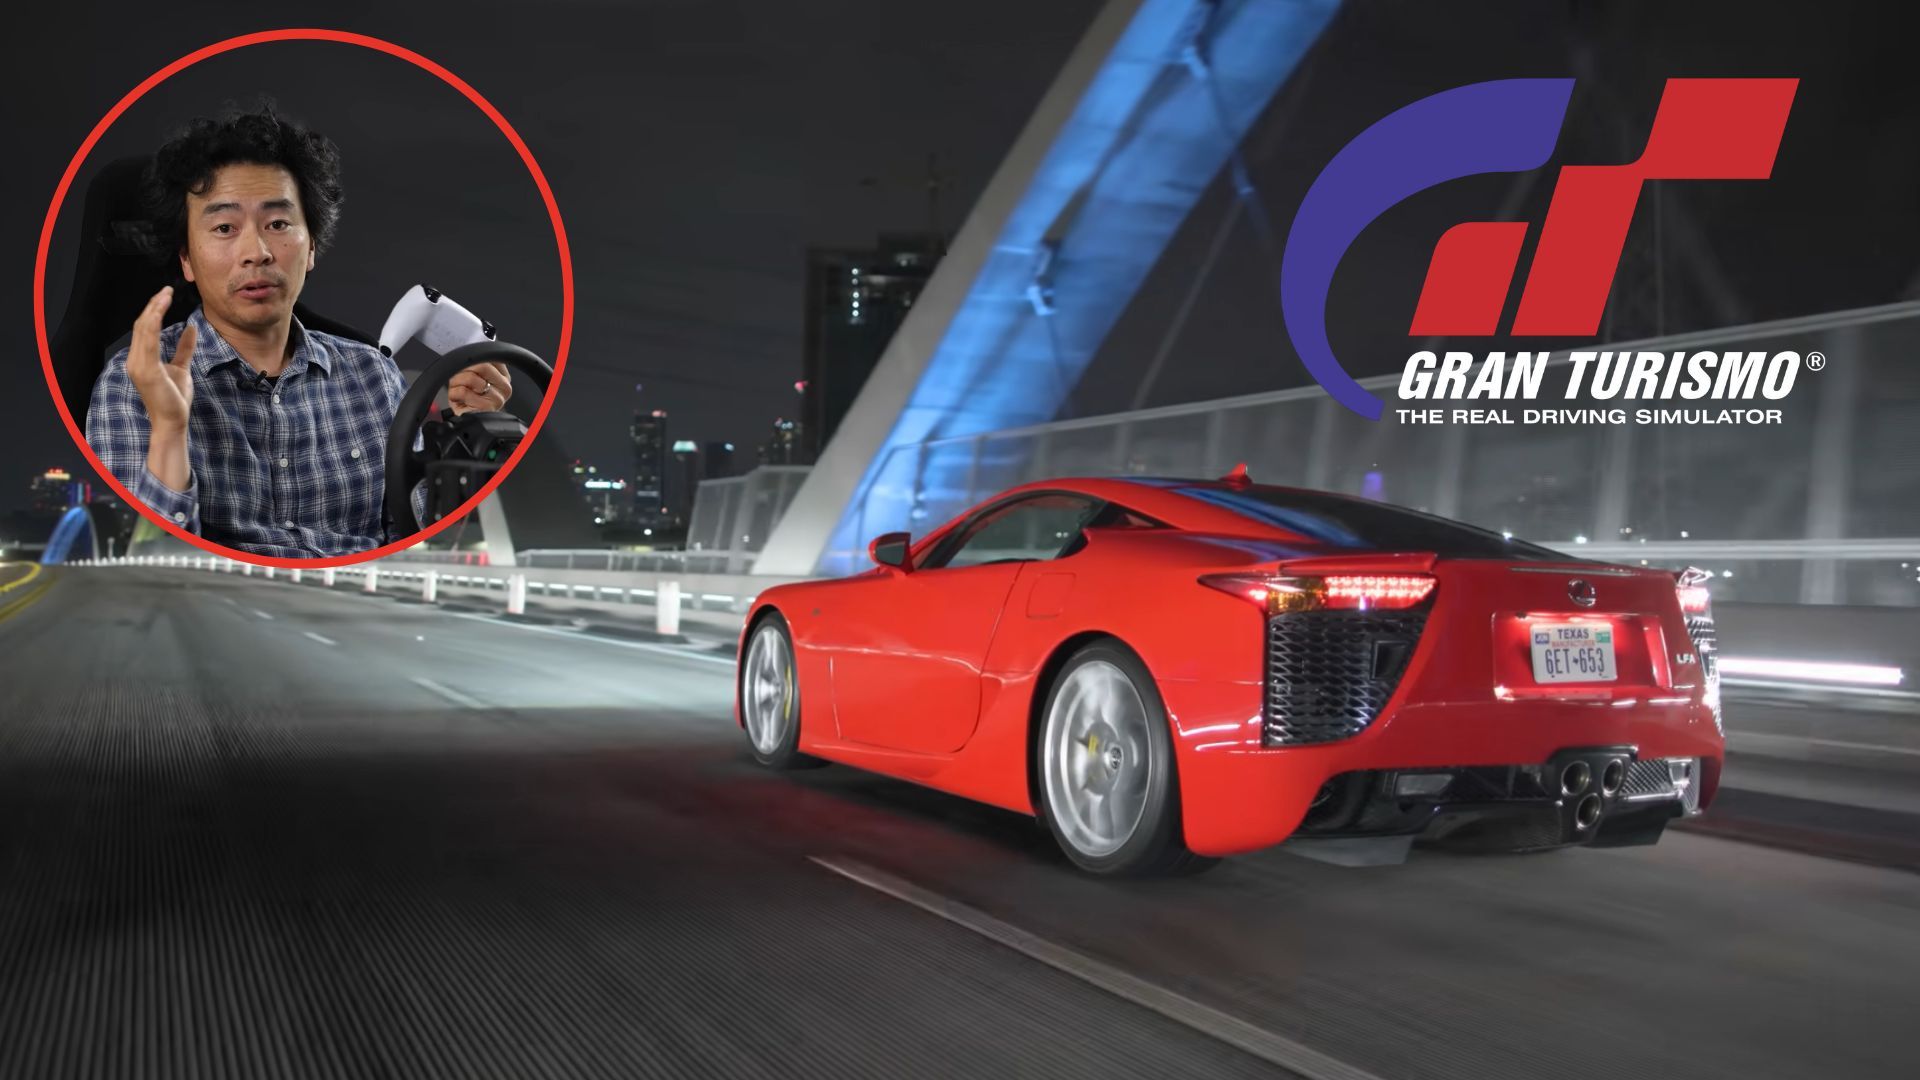 Larry Chen In Front of a Red Lexus LFA promoting Gran Turismo